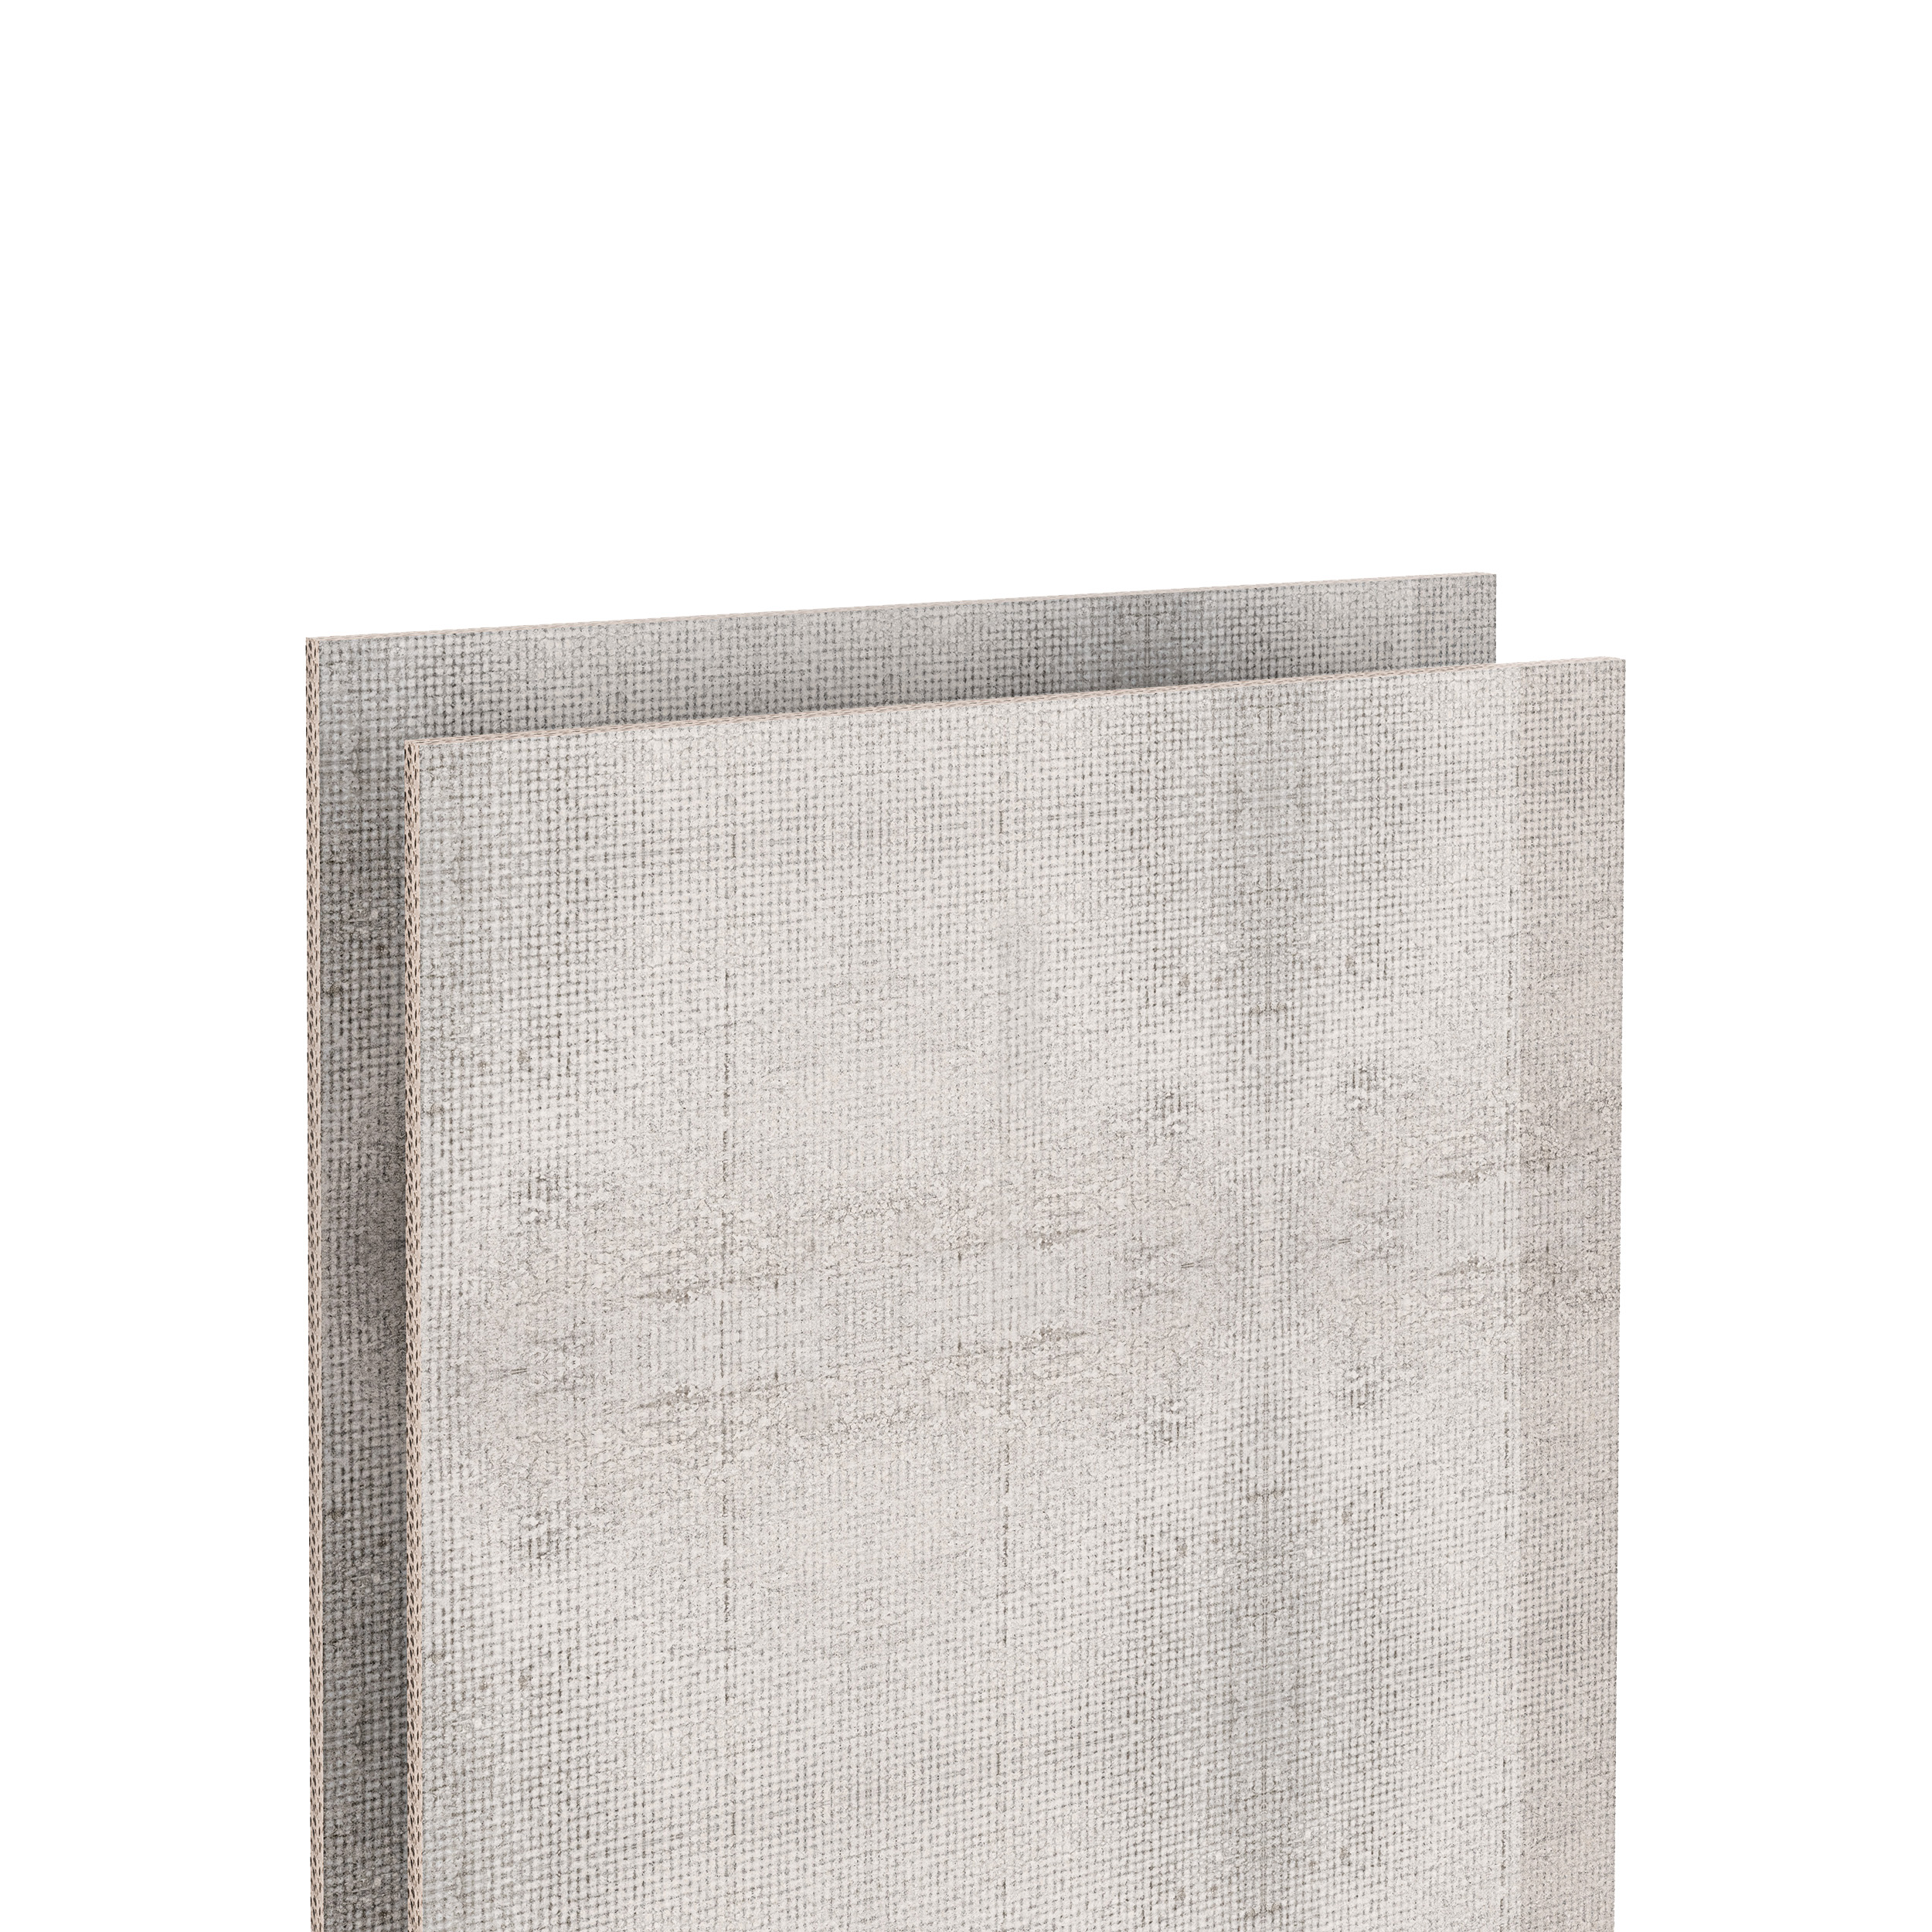 Score’N’Snap® Cement Particle Board<!-- 0270FR -->